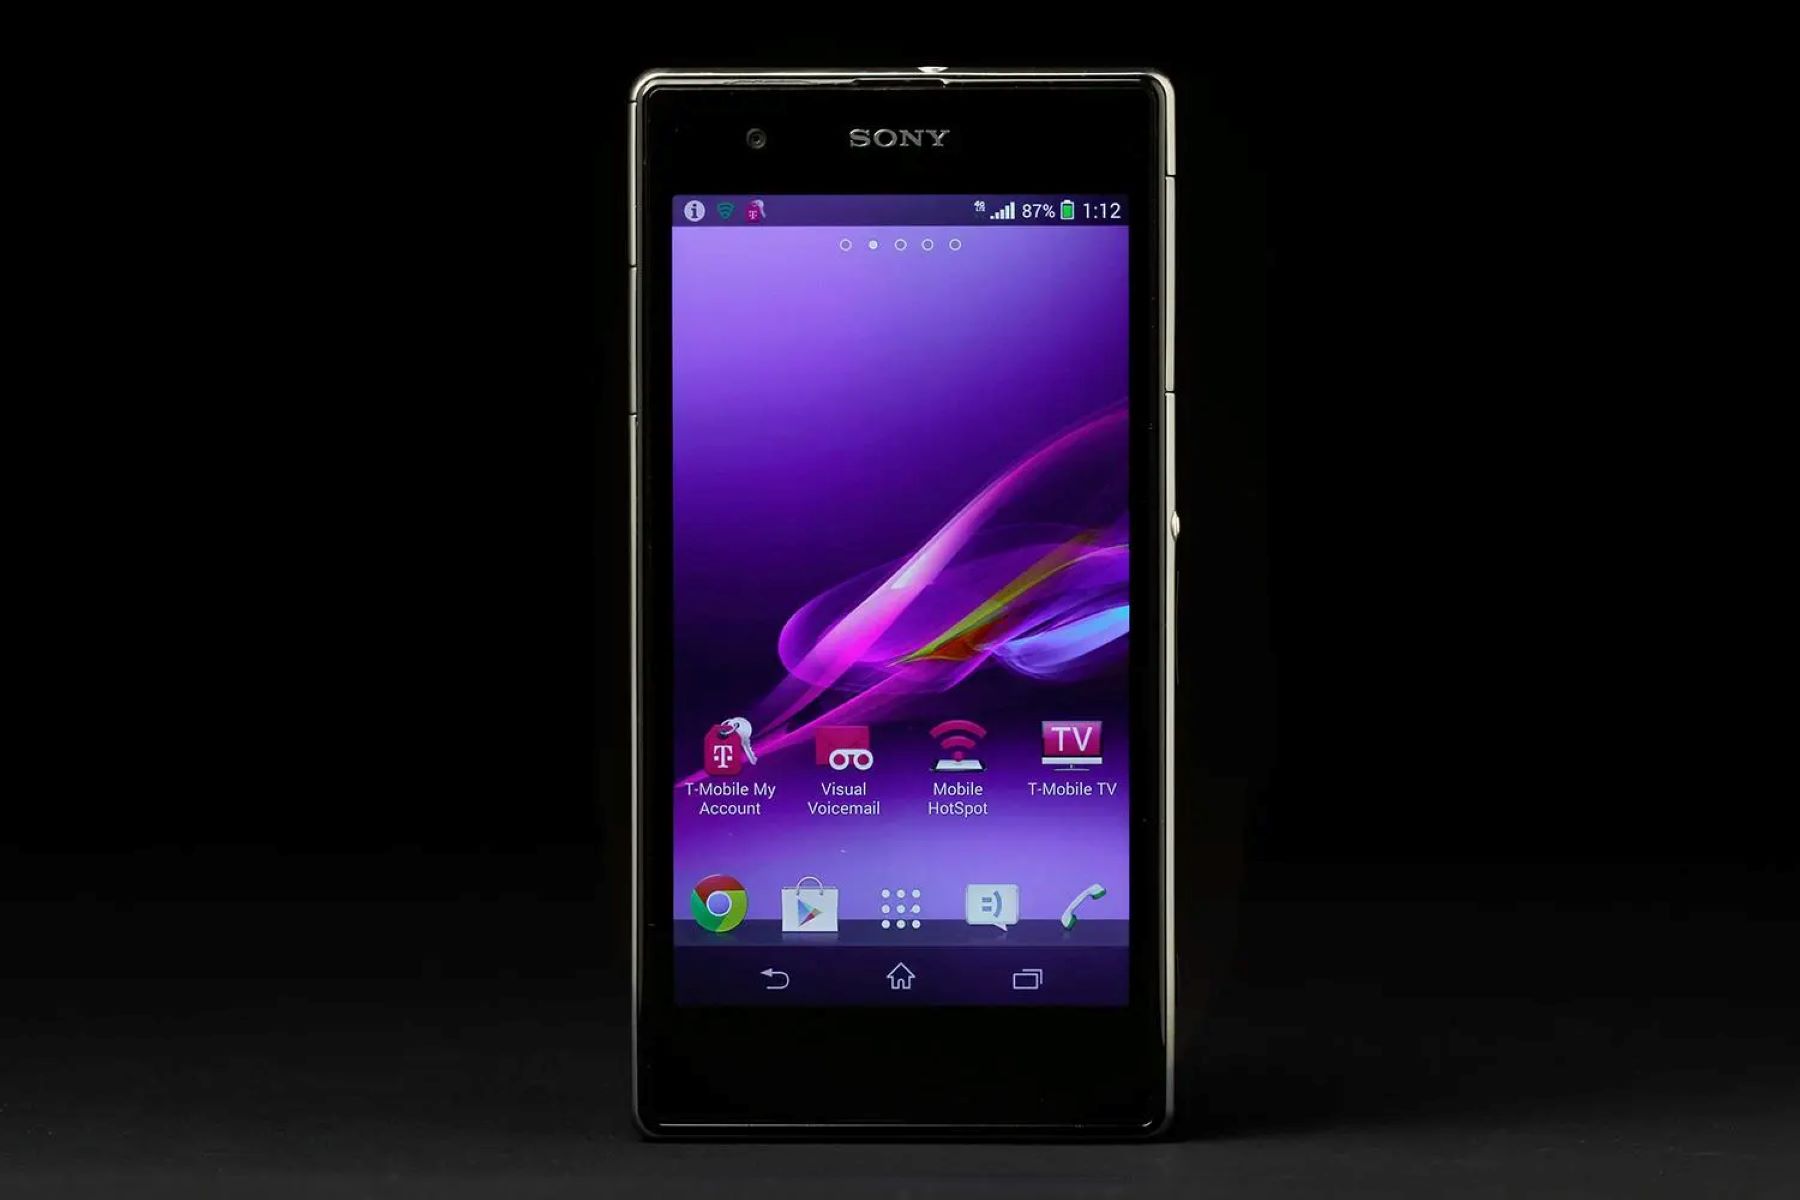 xperia-z1s-screen-replacement-a-step-by-step-guide